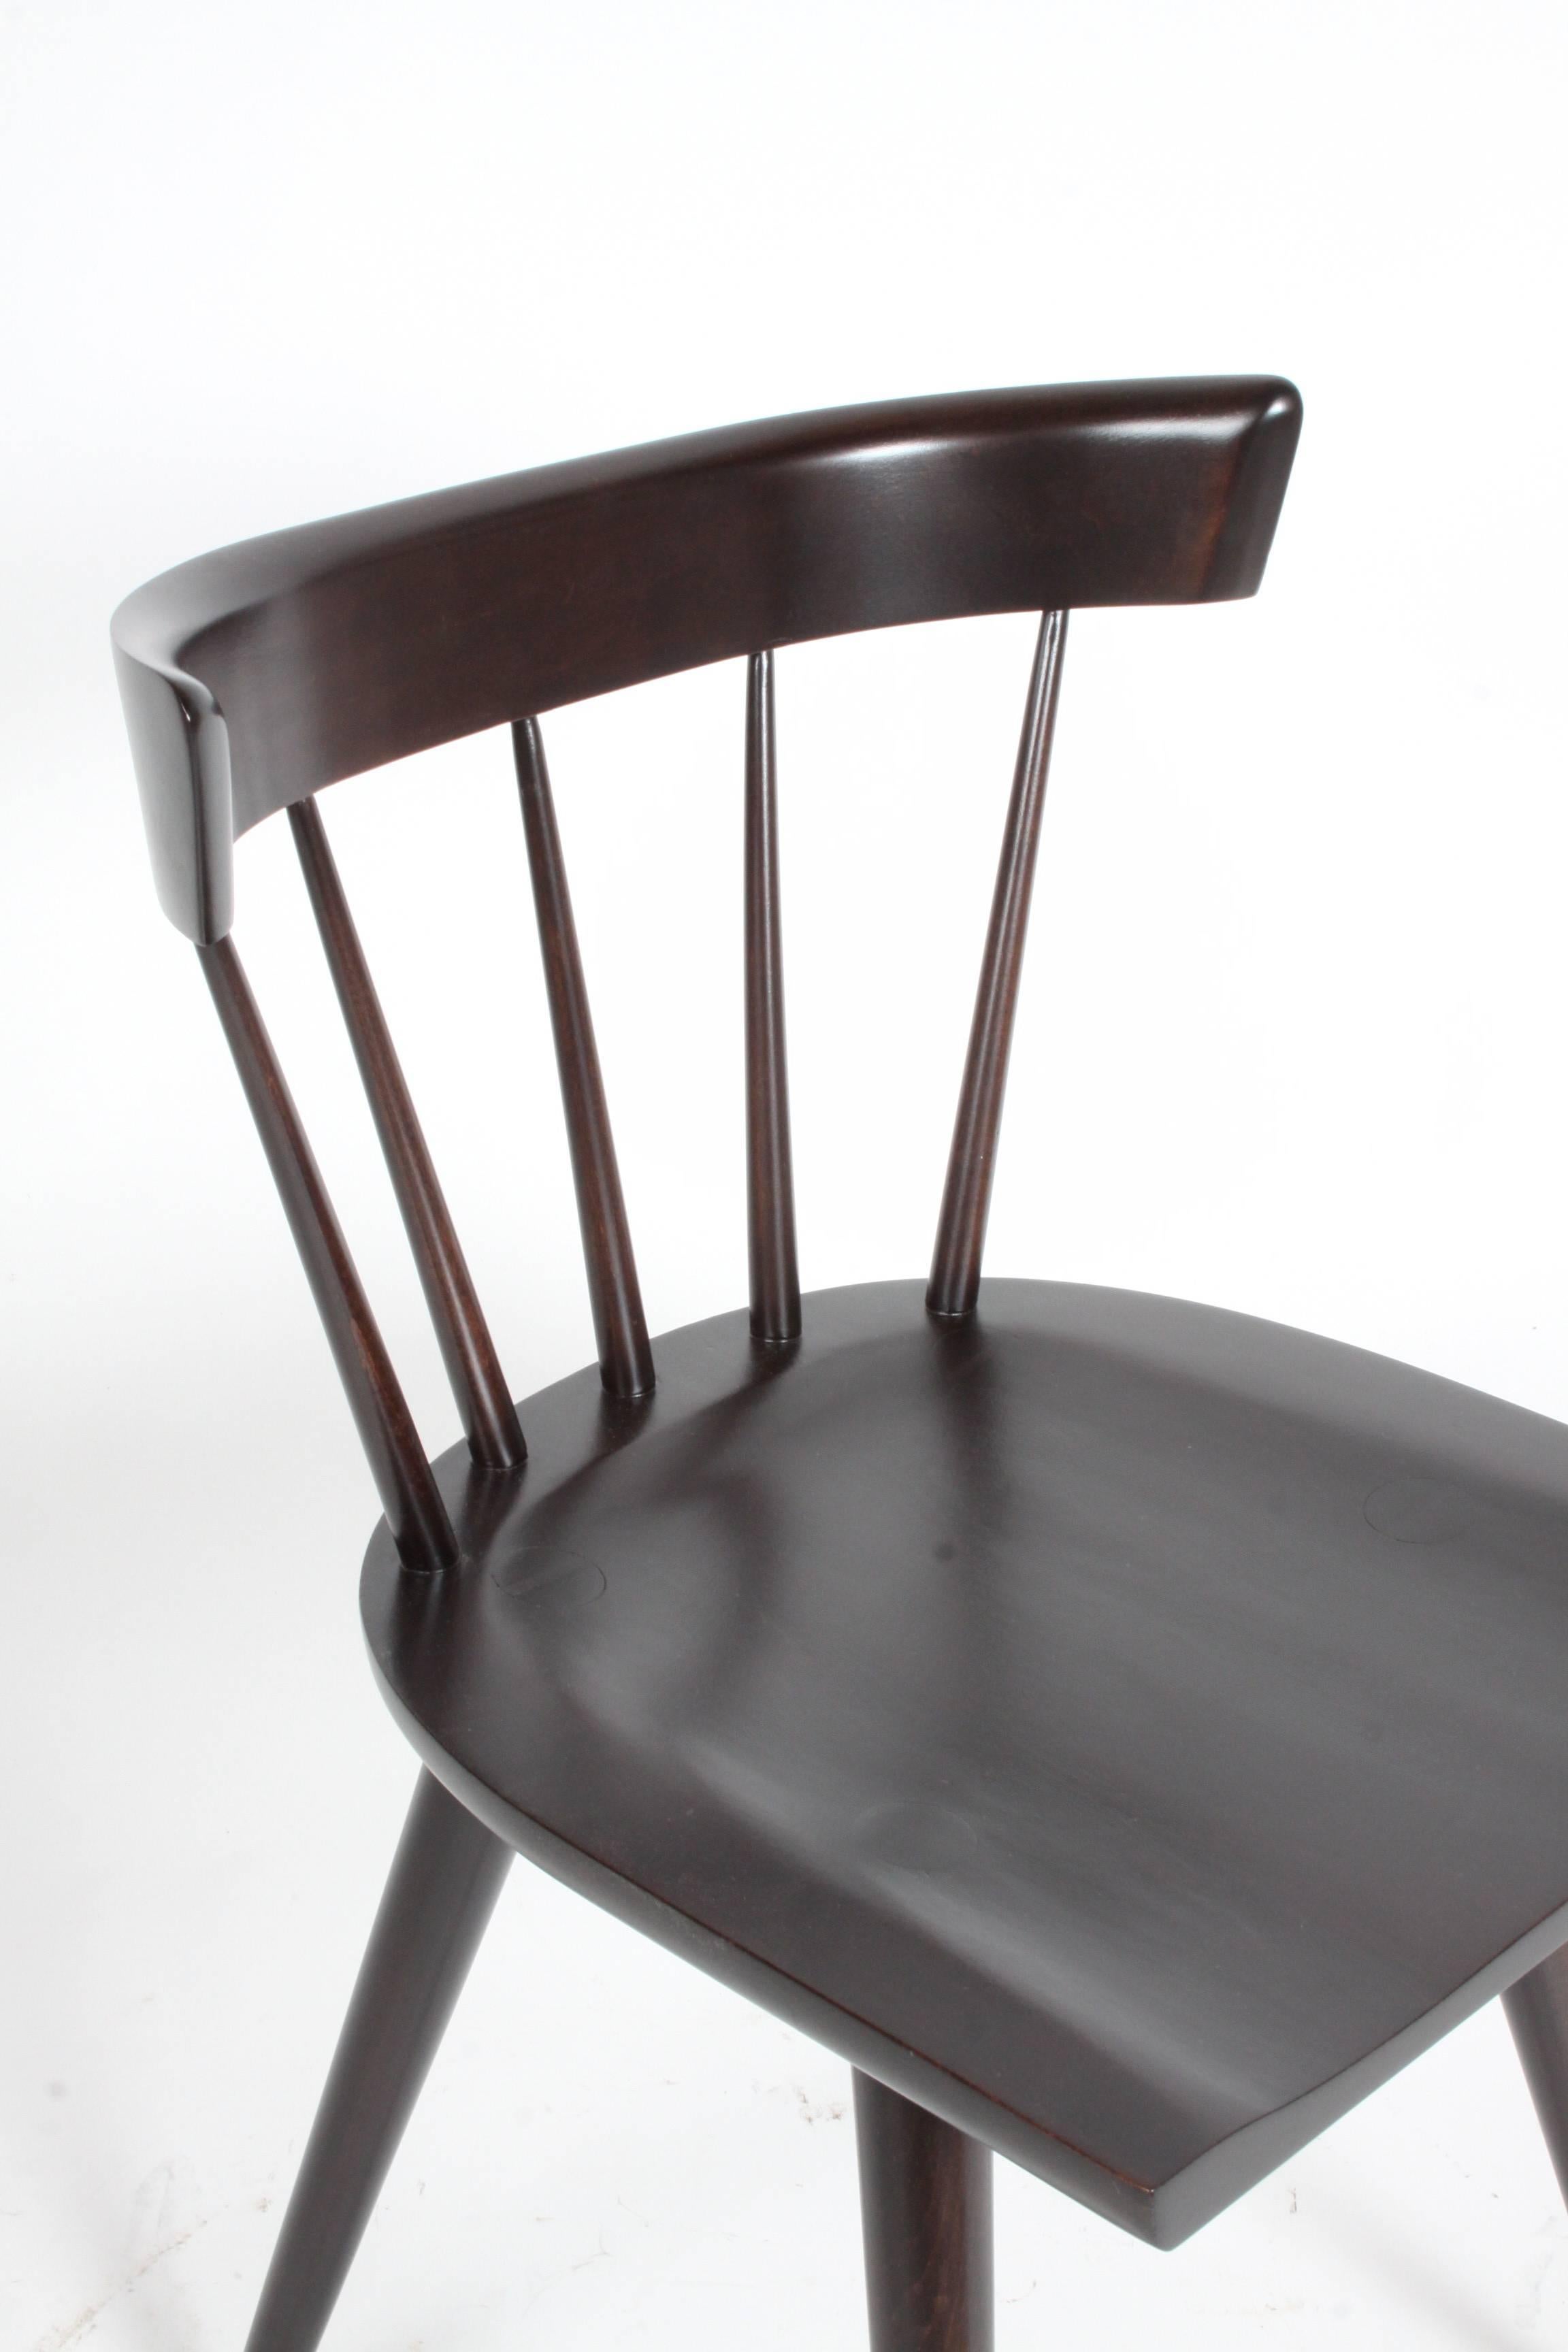 Single Paul McCobb for Planner Group dining chairs refinished in dark espresso finish.